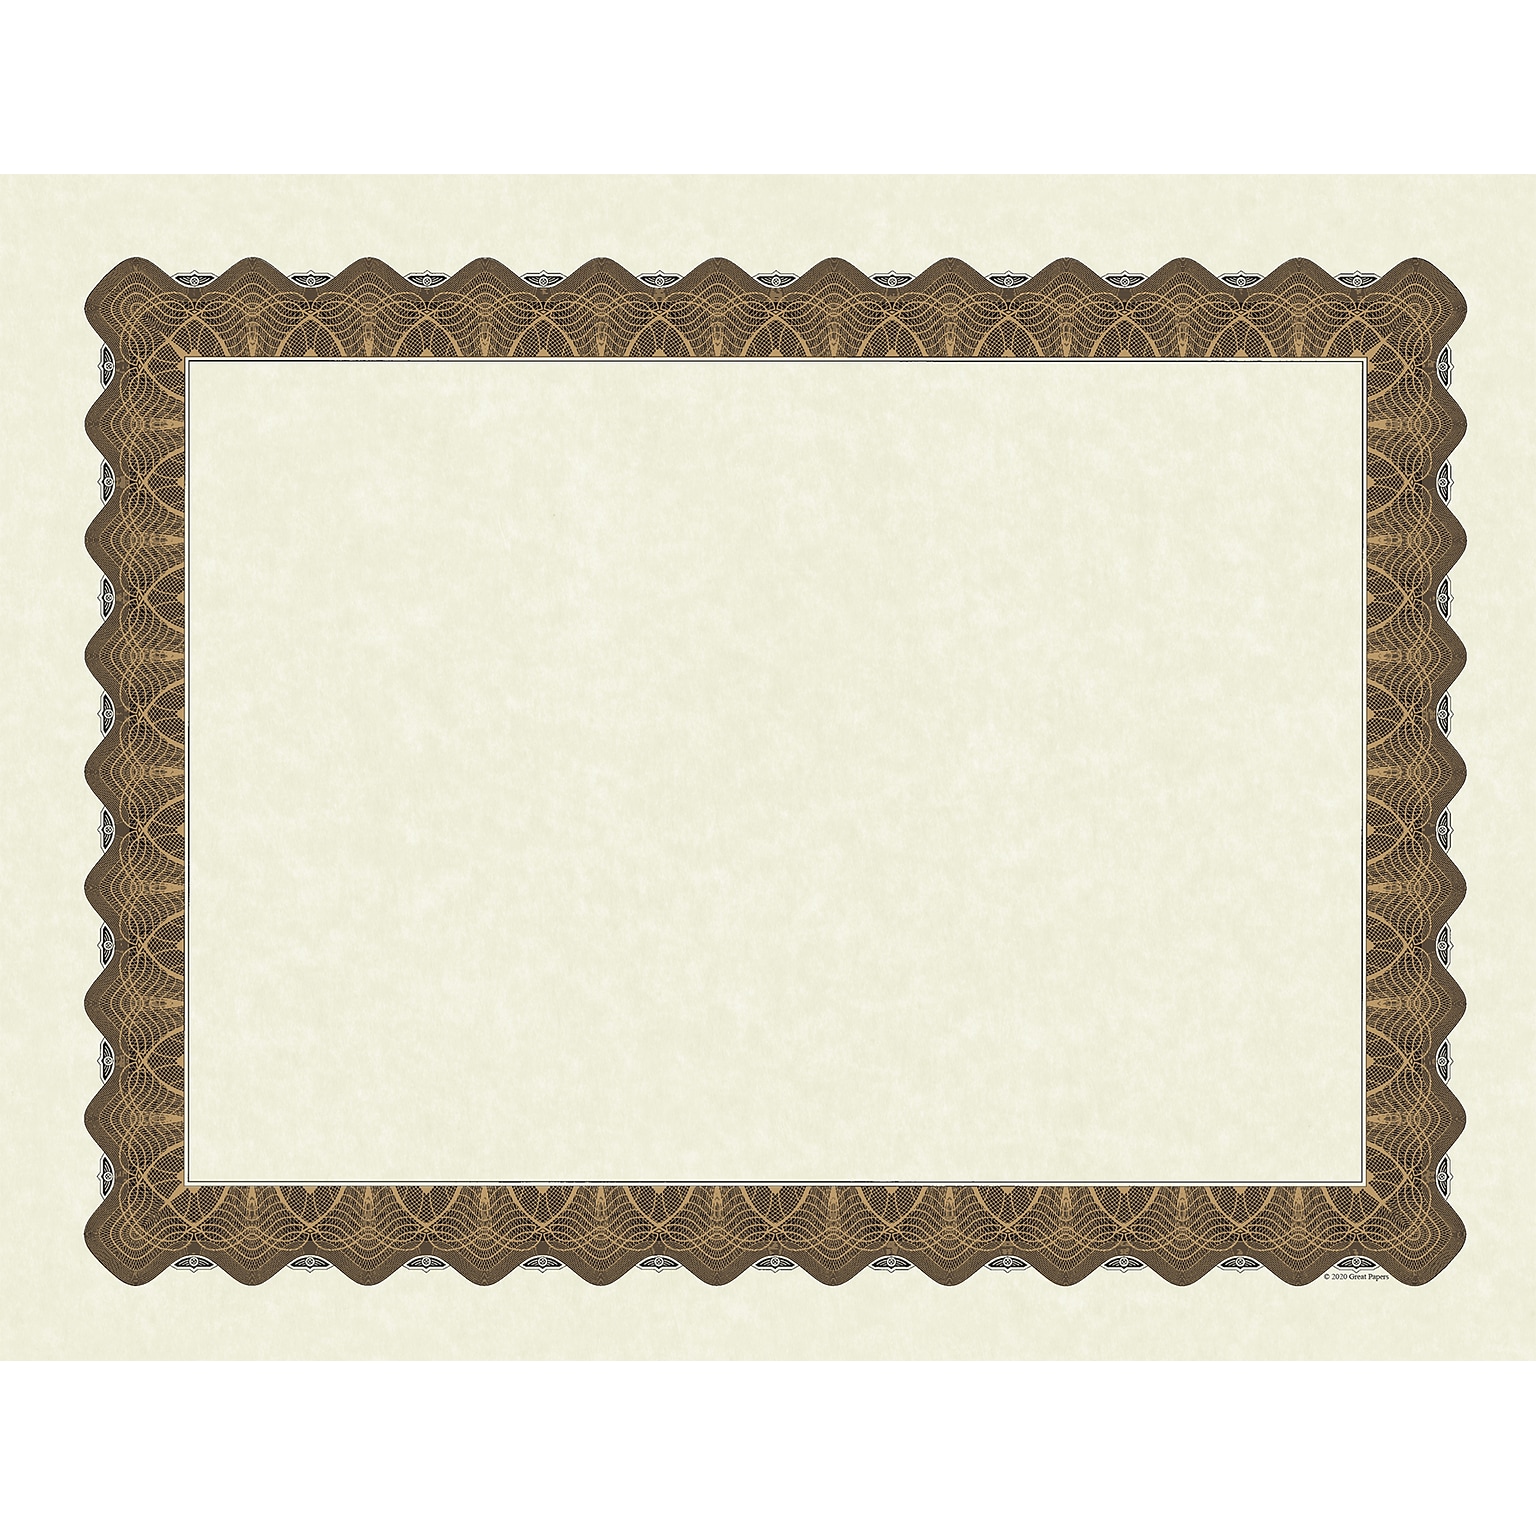 Great Papers Matte Certificates, 8.5 x 11, Beige/Gold, 100/Pack (934000)